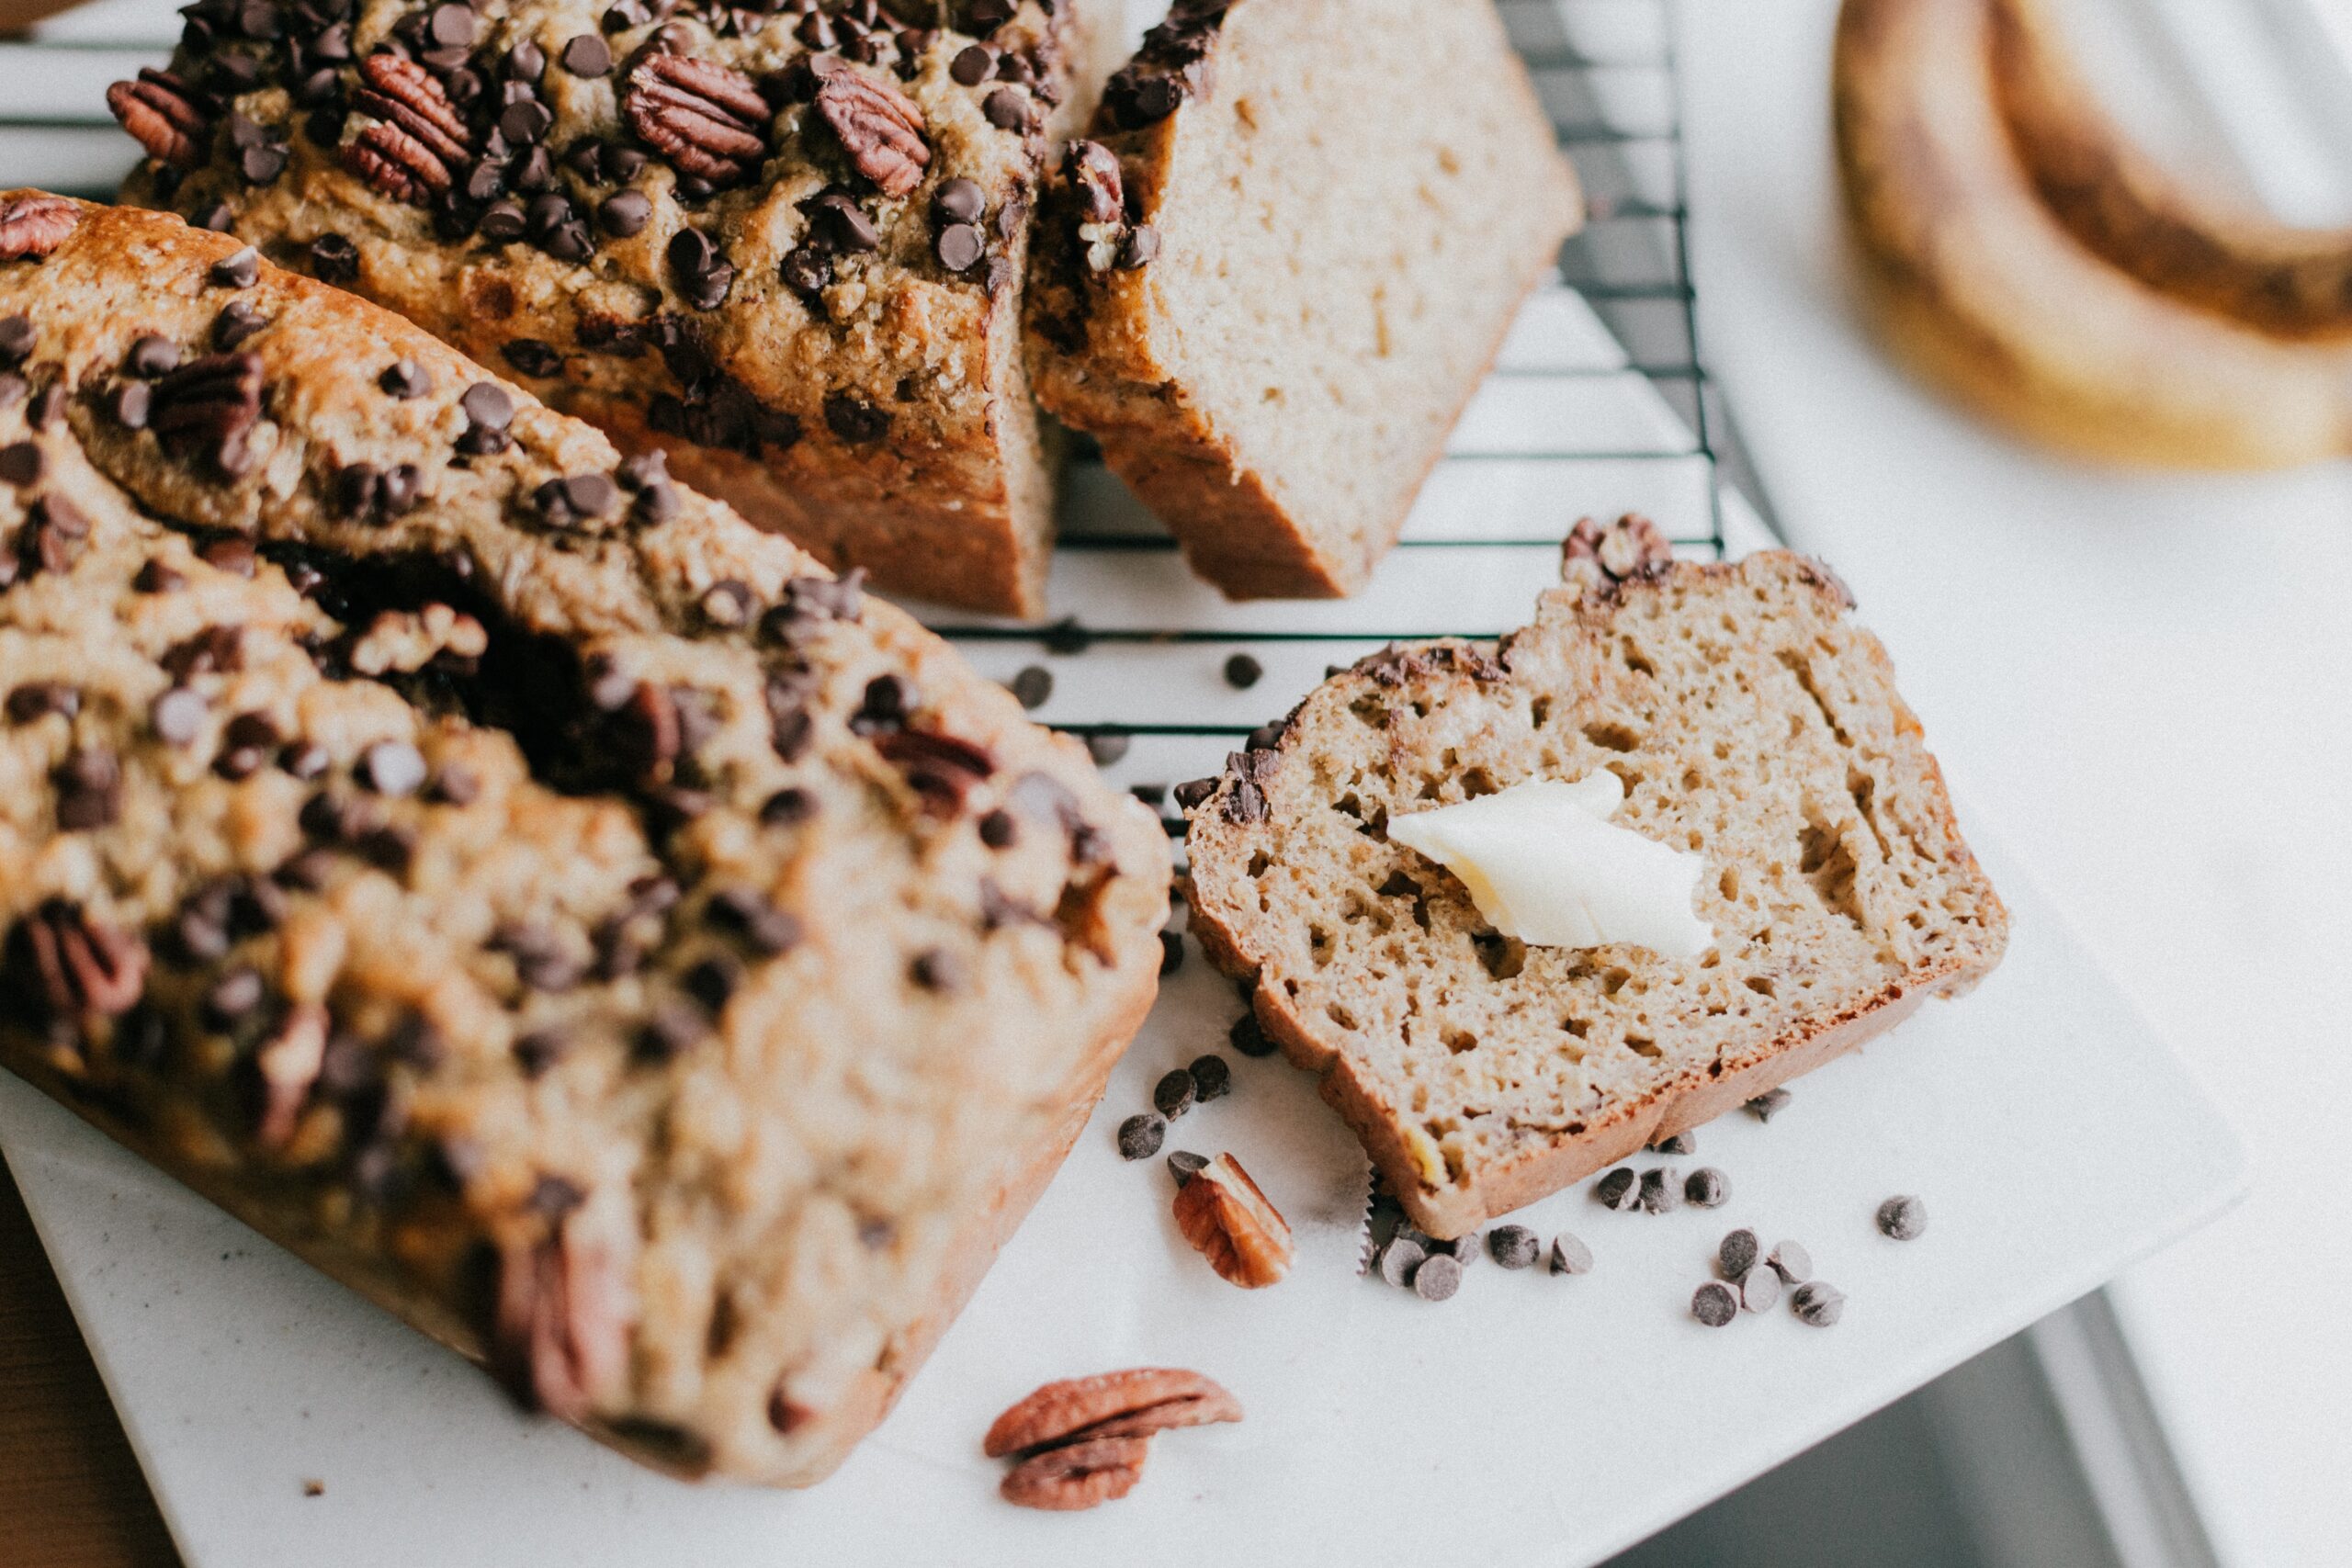 Banana bread with chocolate chips and pecans